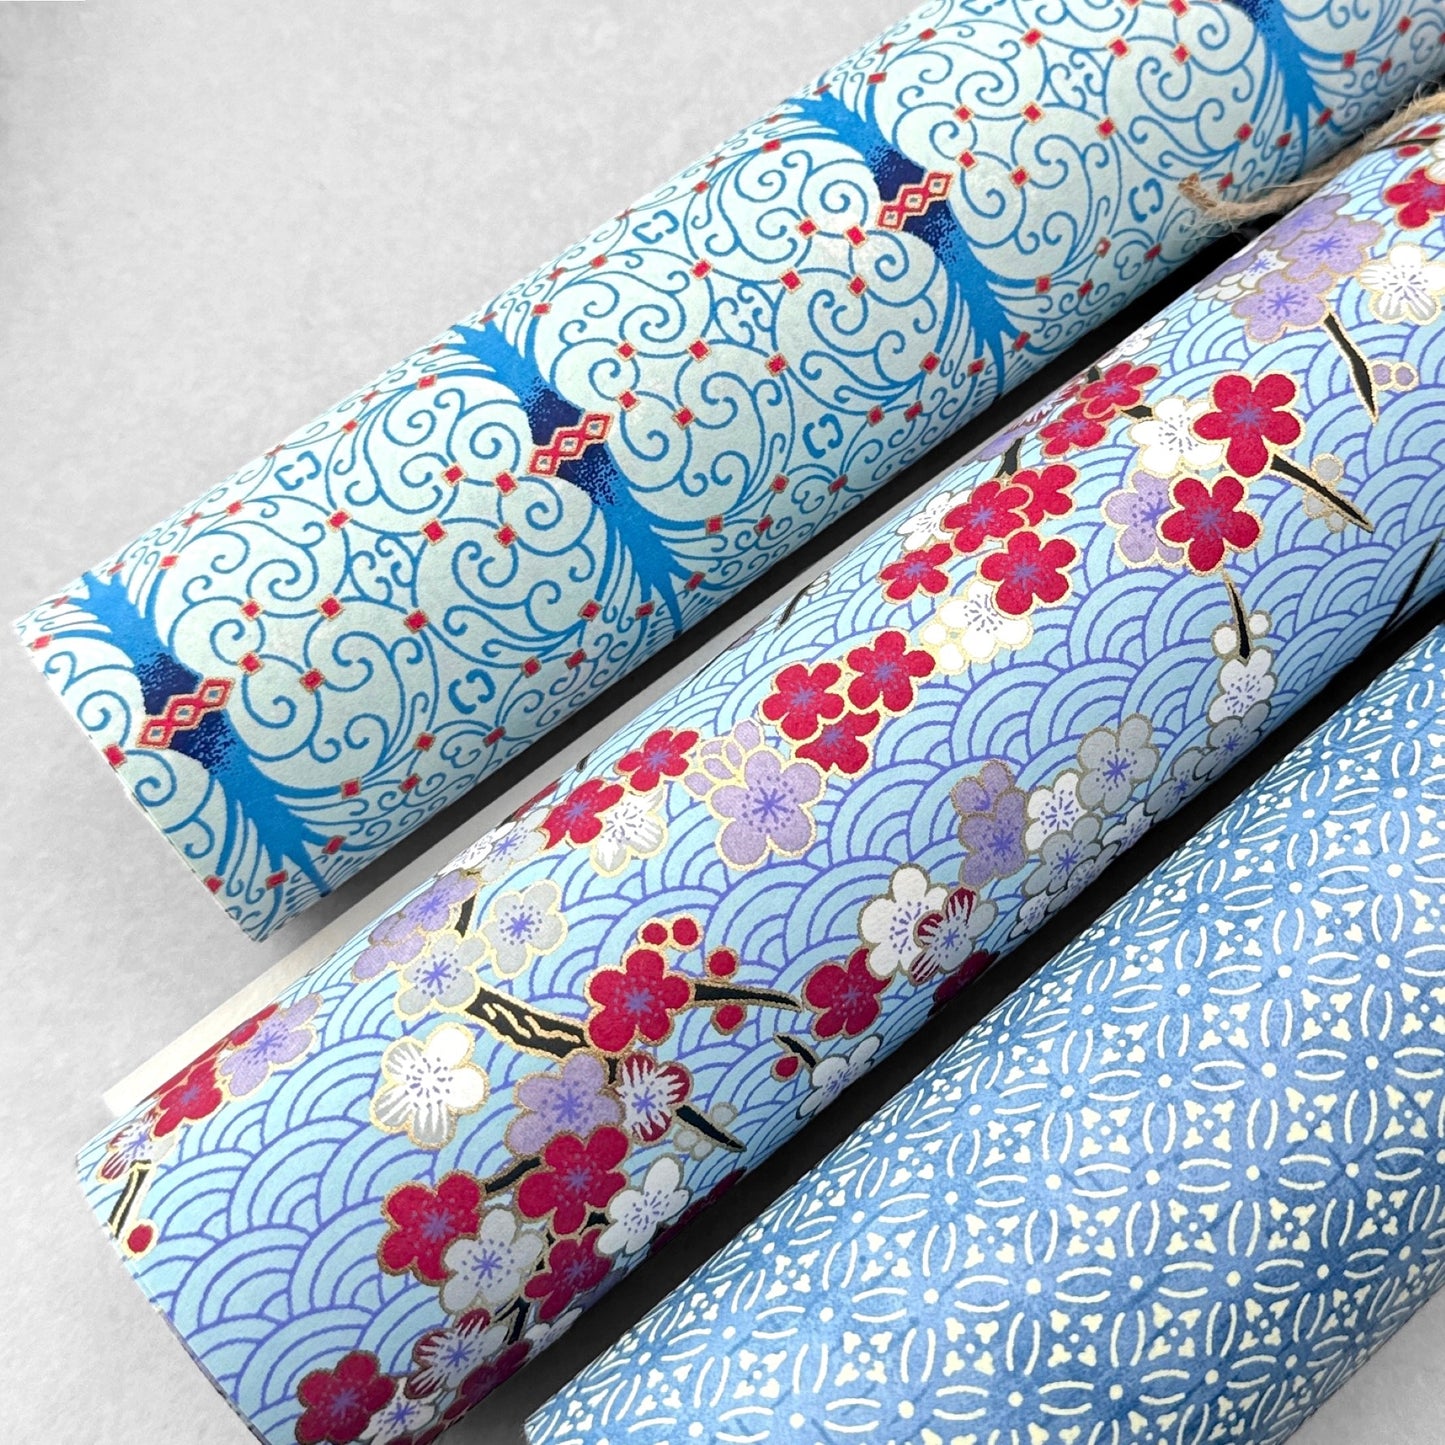 Japanese silkscreen chiyogami paper with a intricate filigree trellis design in blue with red and gold accent. Pictured with other designs